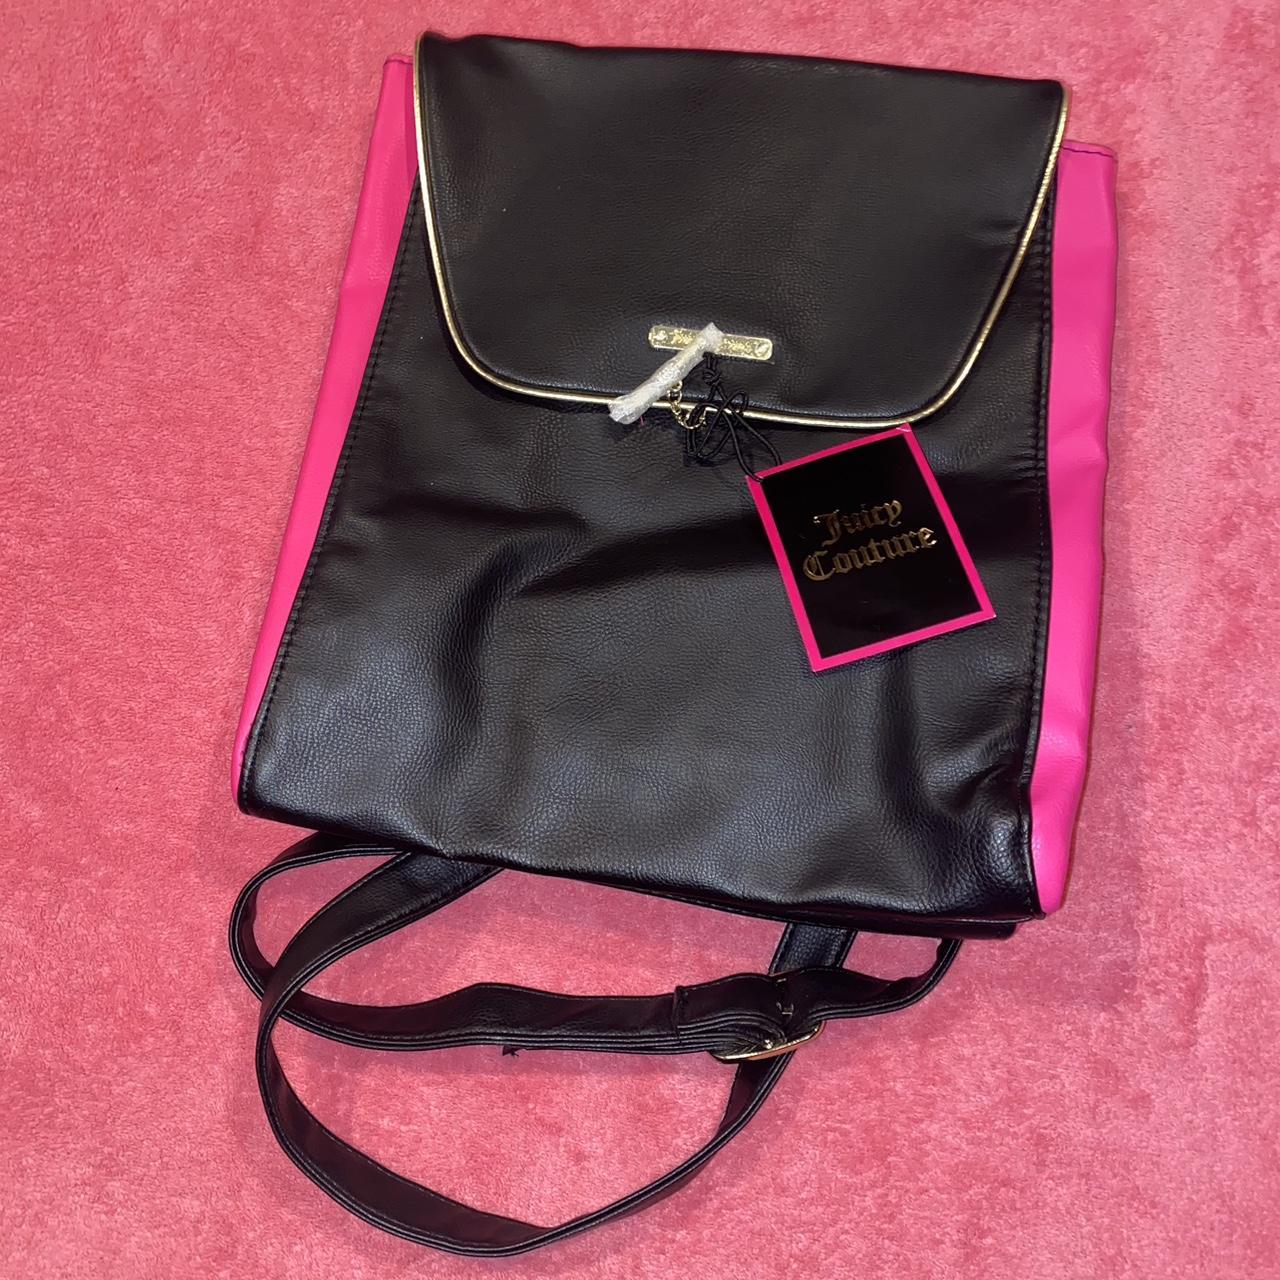 Juicy Couture backpack Like new pink leather with - Depop